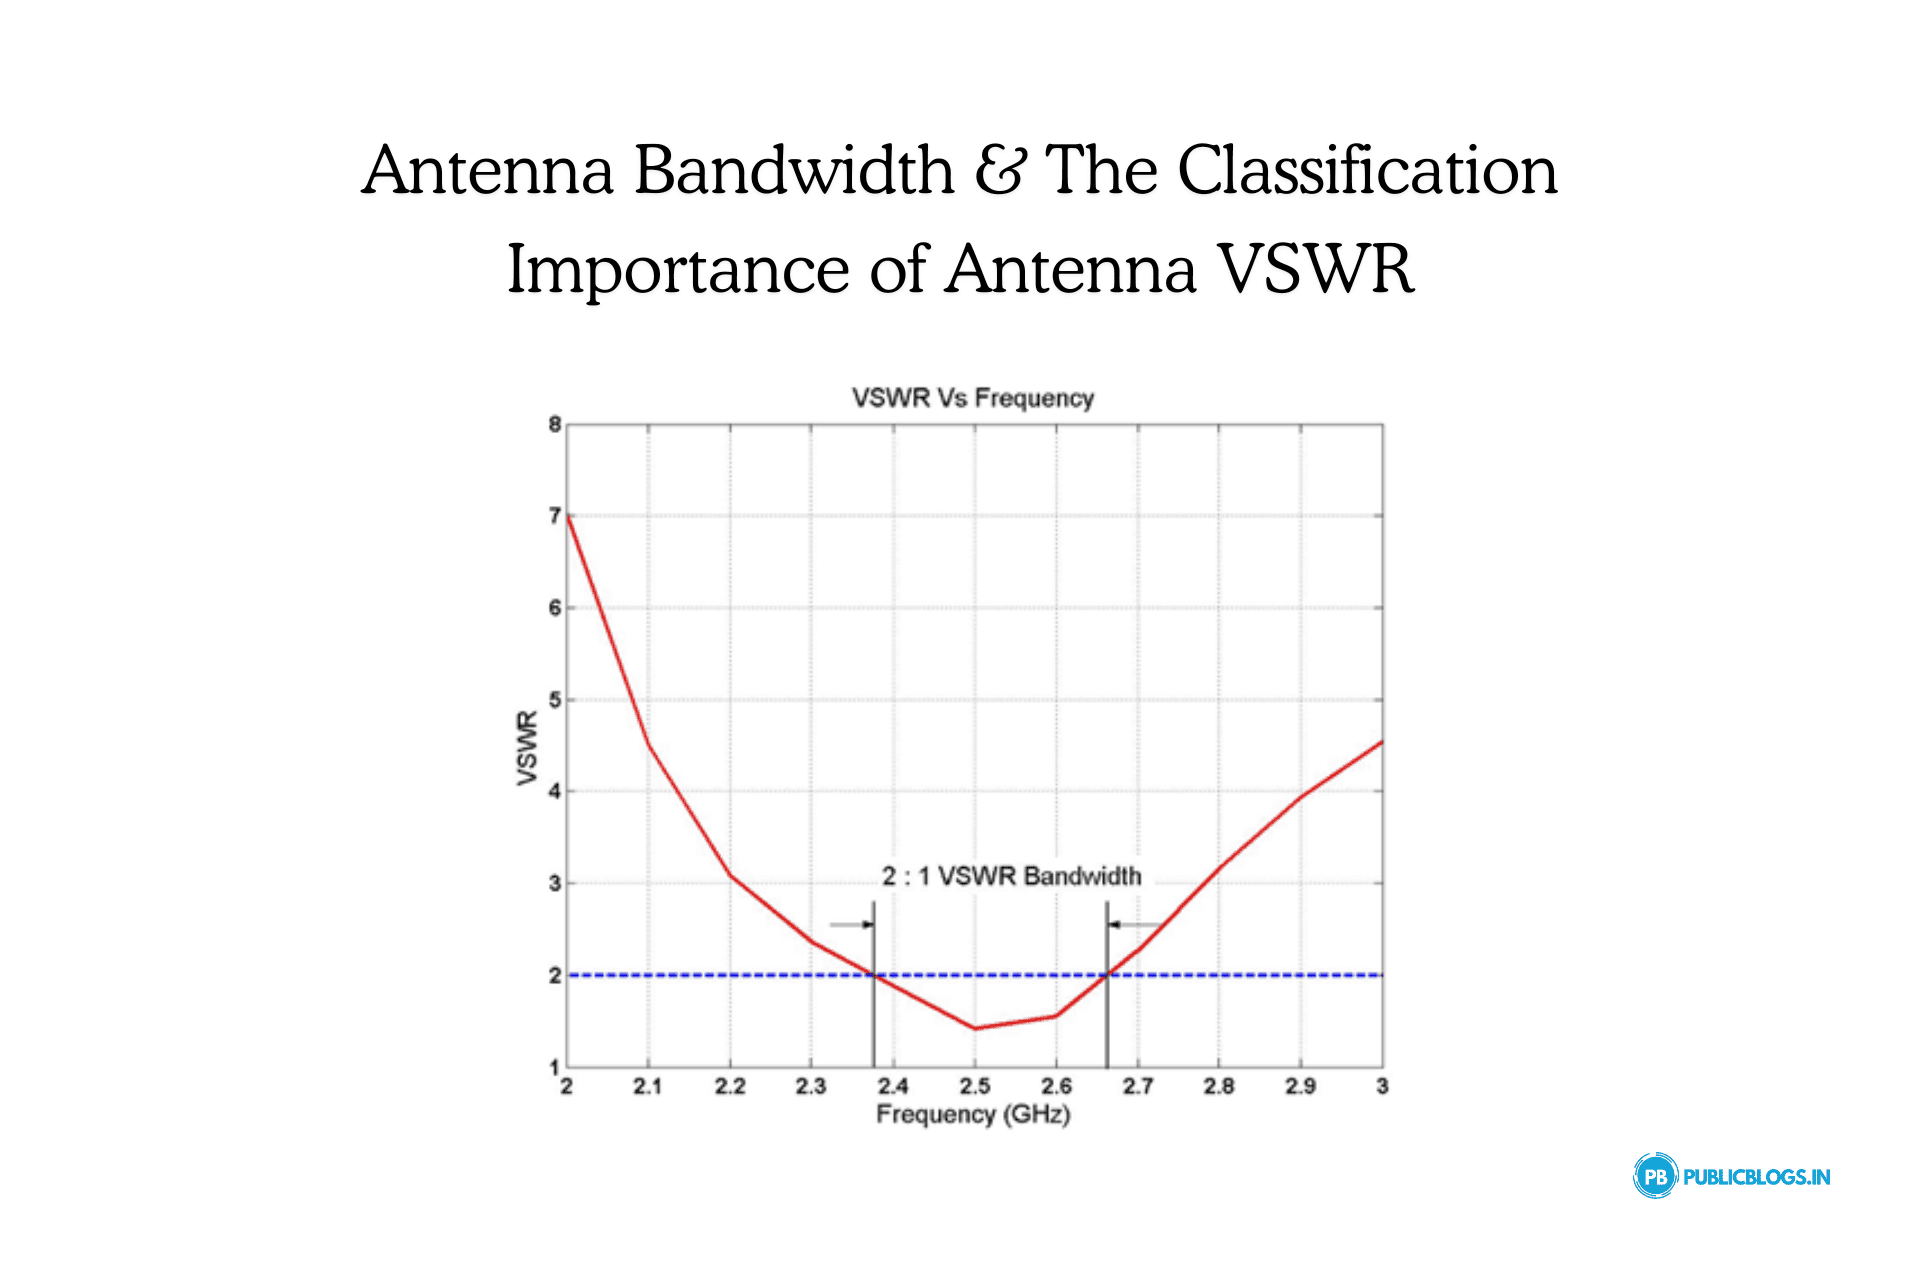 Antenna Bandwidth, The Classification & Importance of Antenna VSWR details